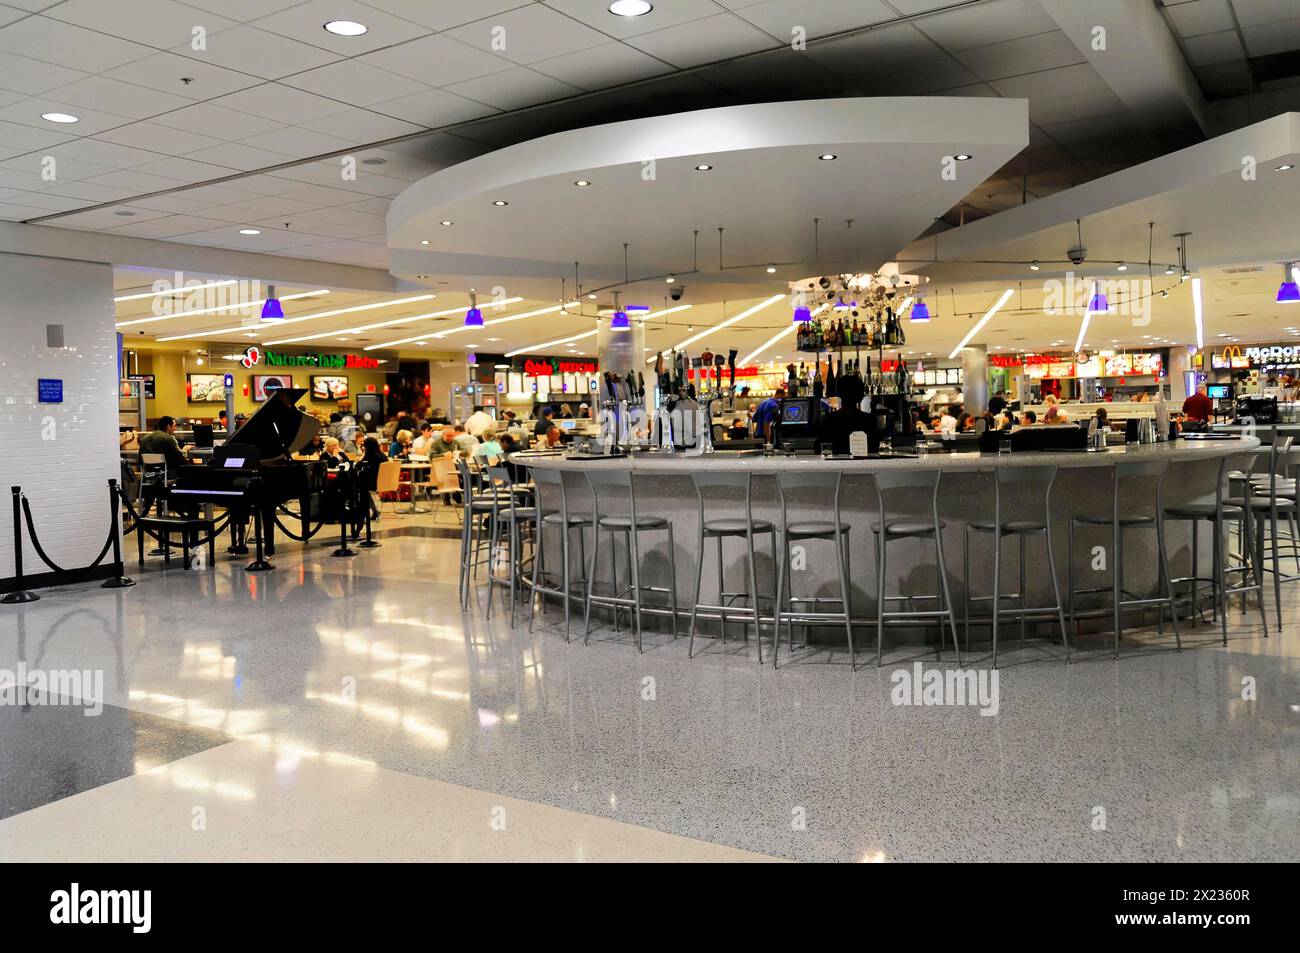 AUGUSTO C. SANDINO Airport, Managua, Nicaragua, A modern bar with blue lighting in the airport catering area, Central America, Central America Stock Photo